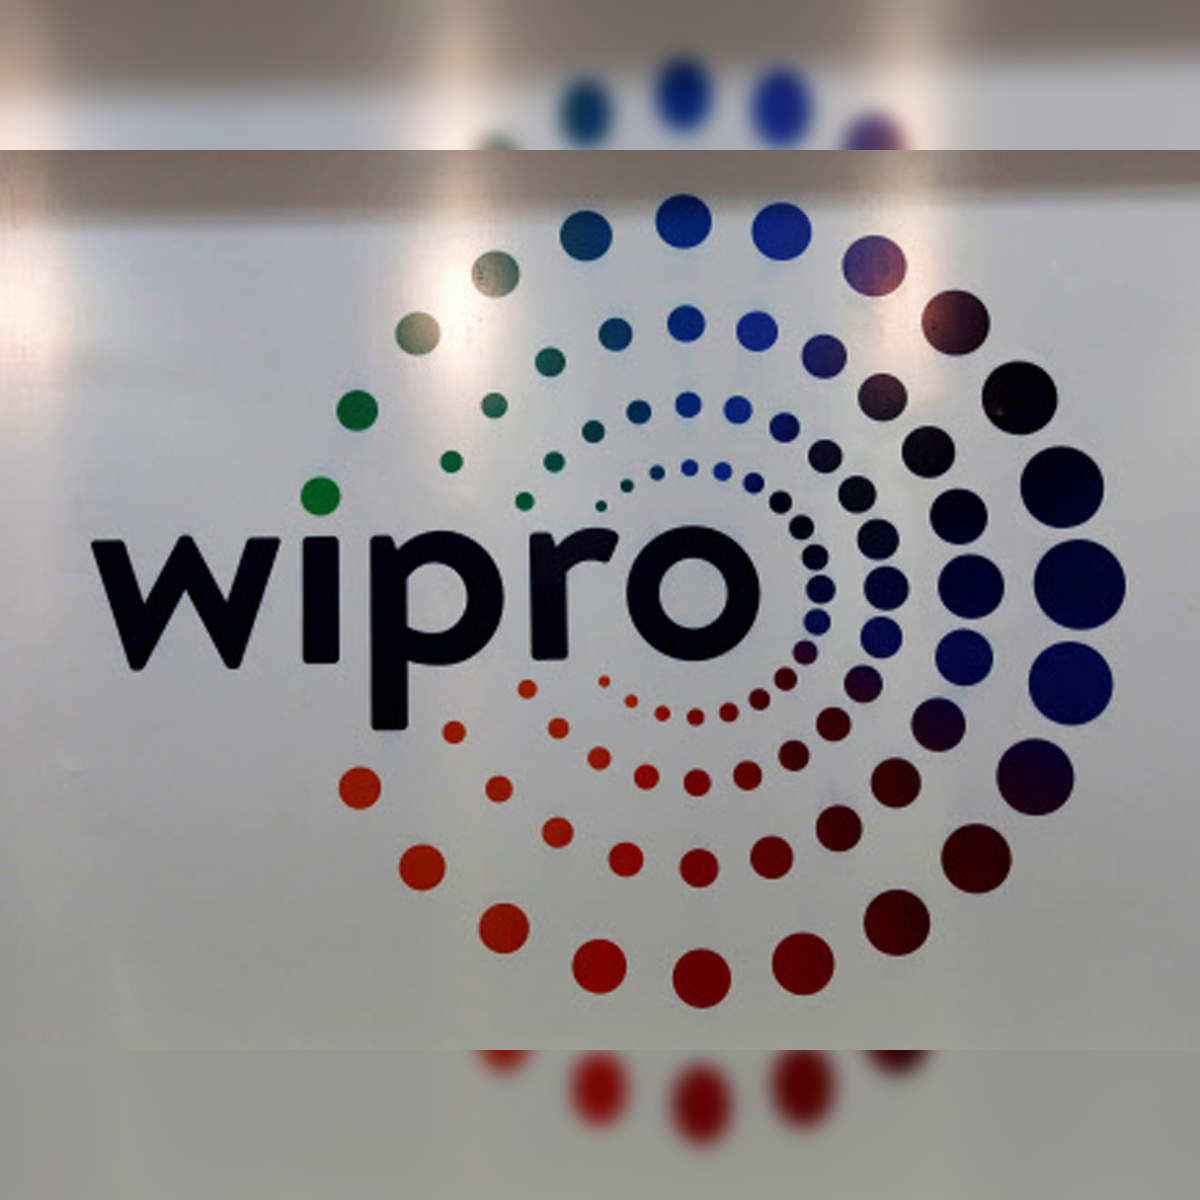 Wipro And Intel Foundry Join Forces To Drive Innovation In AI Chip  Manufacturing | Companies News, Times Now